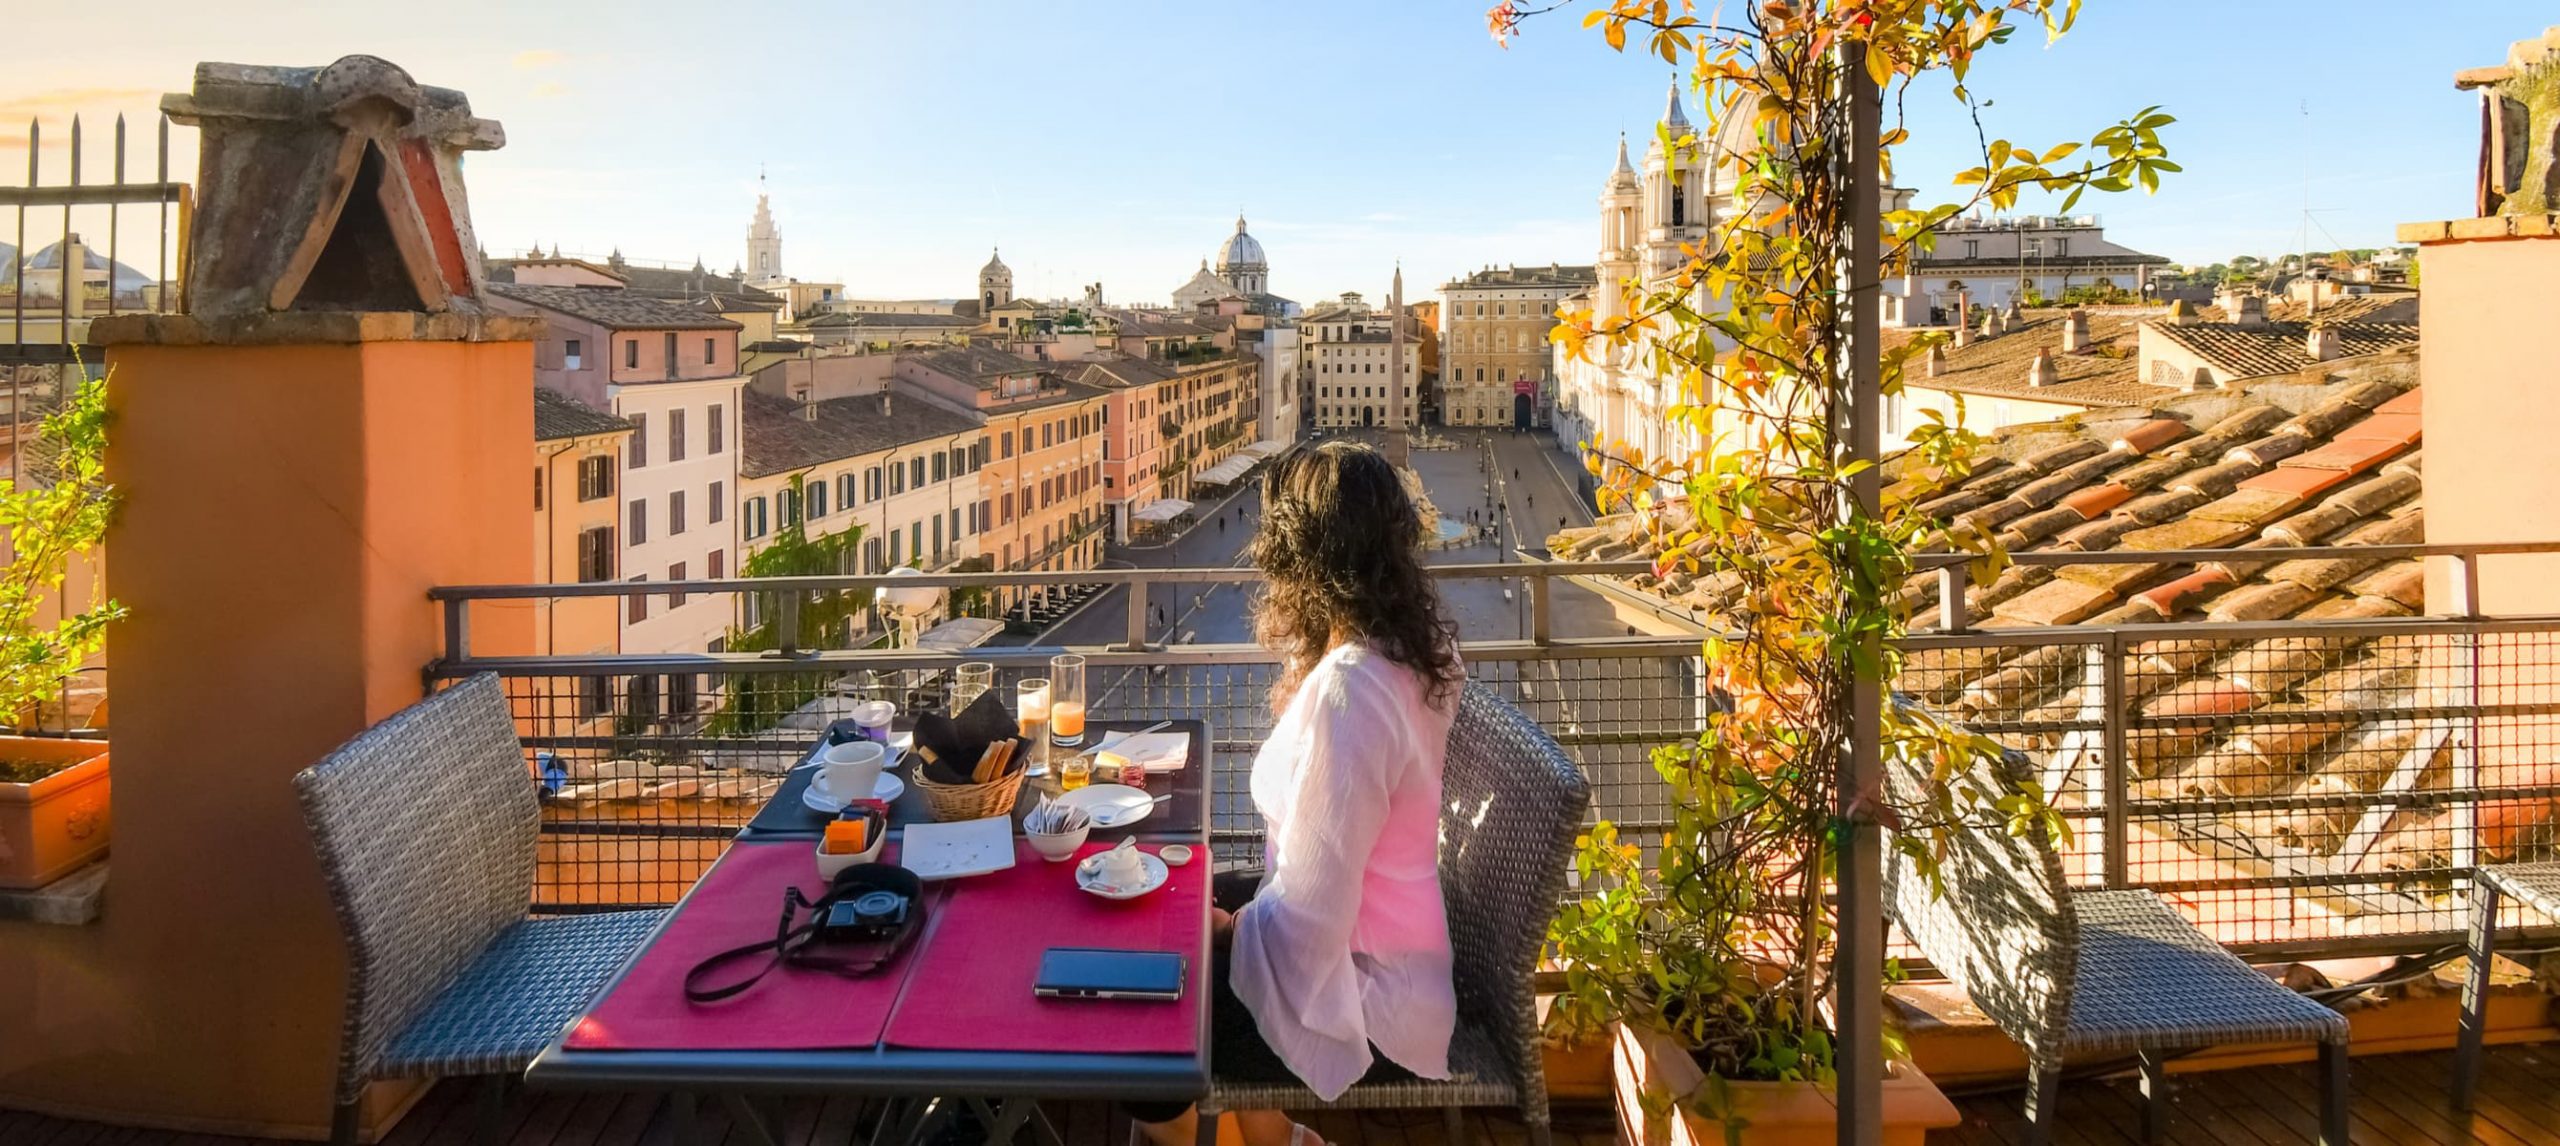 6 Rome Hotels Near The Pantheon That You’ll Love